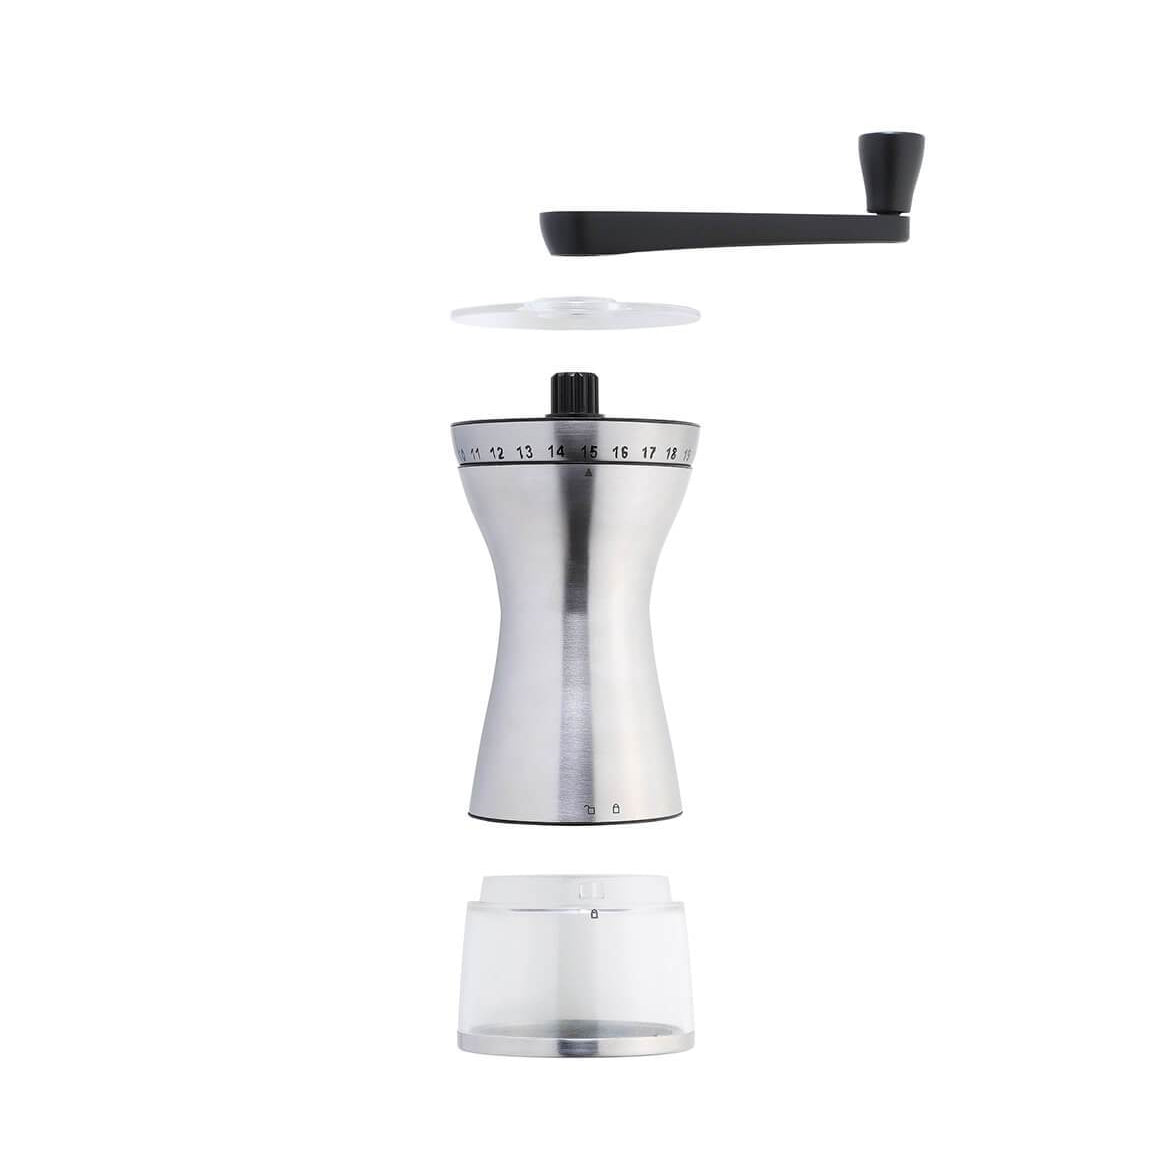 Manaos Coffee Grinder with Grind Selector